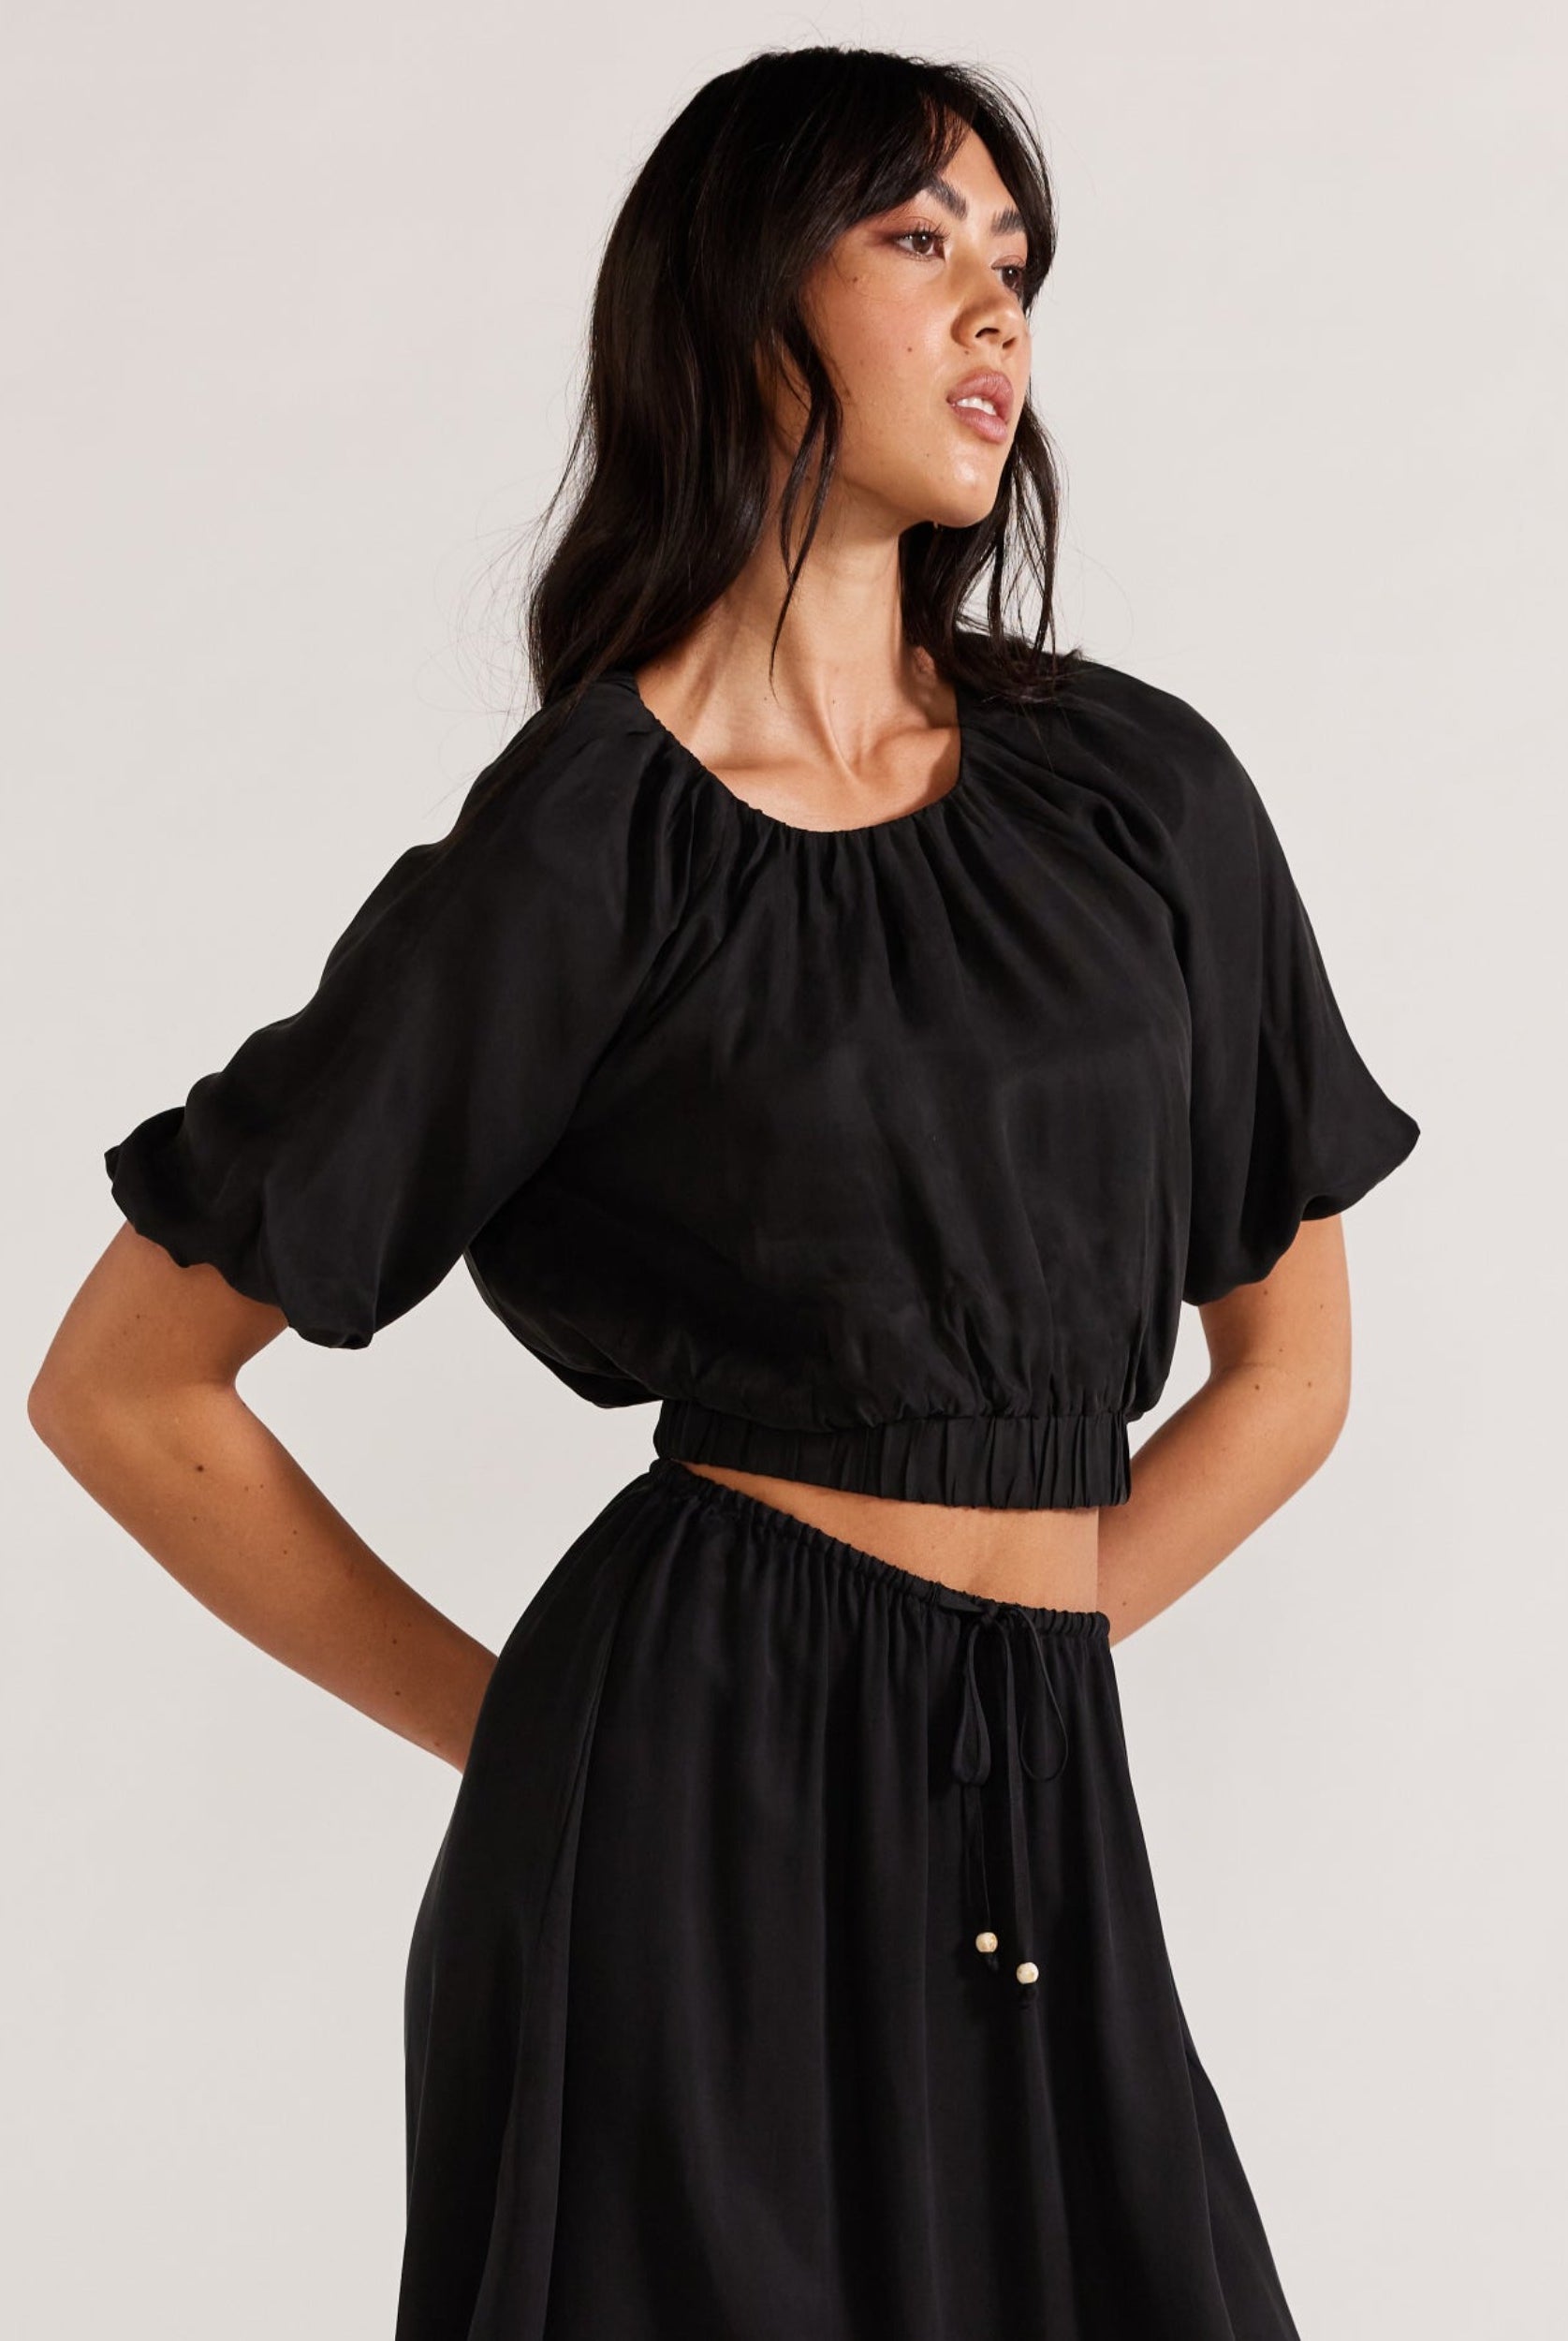 Black cropped top with matching skirt in cupro fabric from Staple the Label